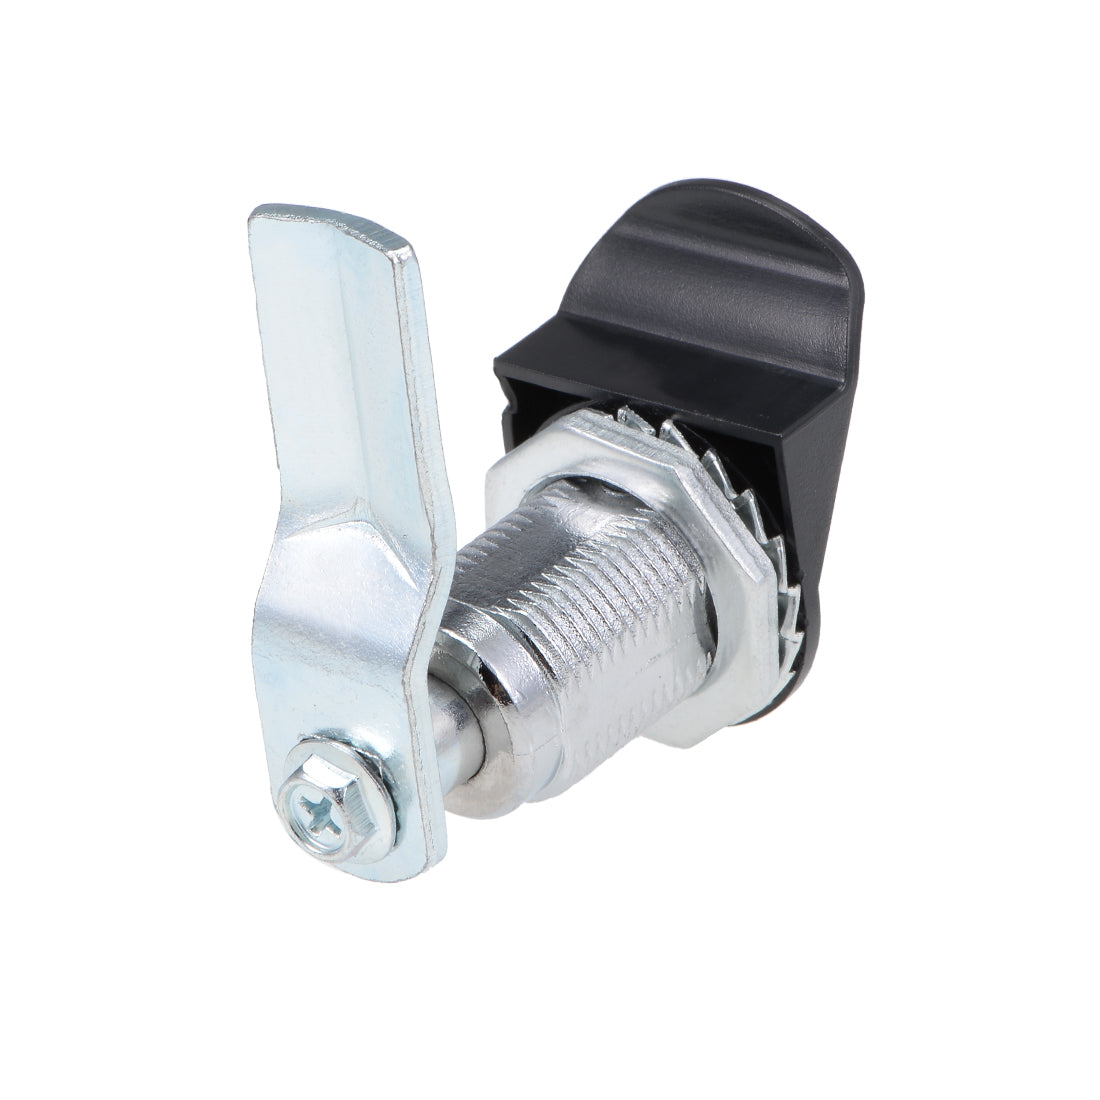 uxcell Uxcell Triangle Cam Lock 22mm Cylinder Dia 49mm Long Cam Keyed Alike Silver Tone